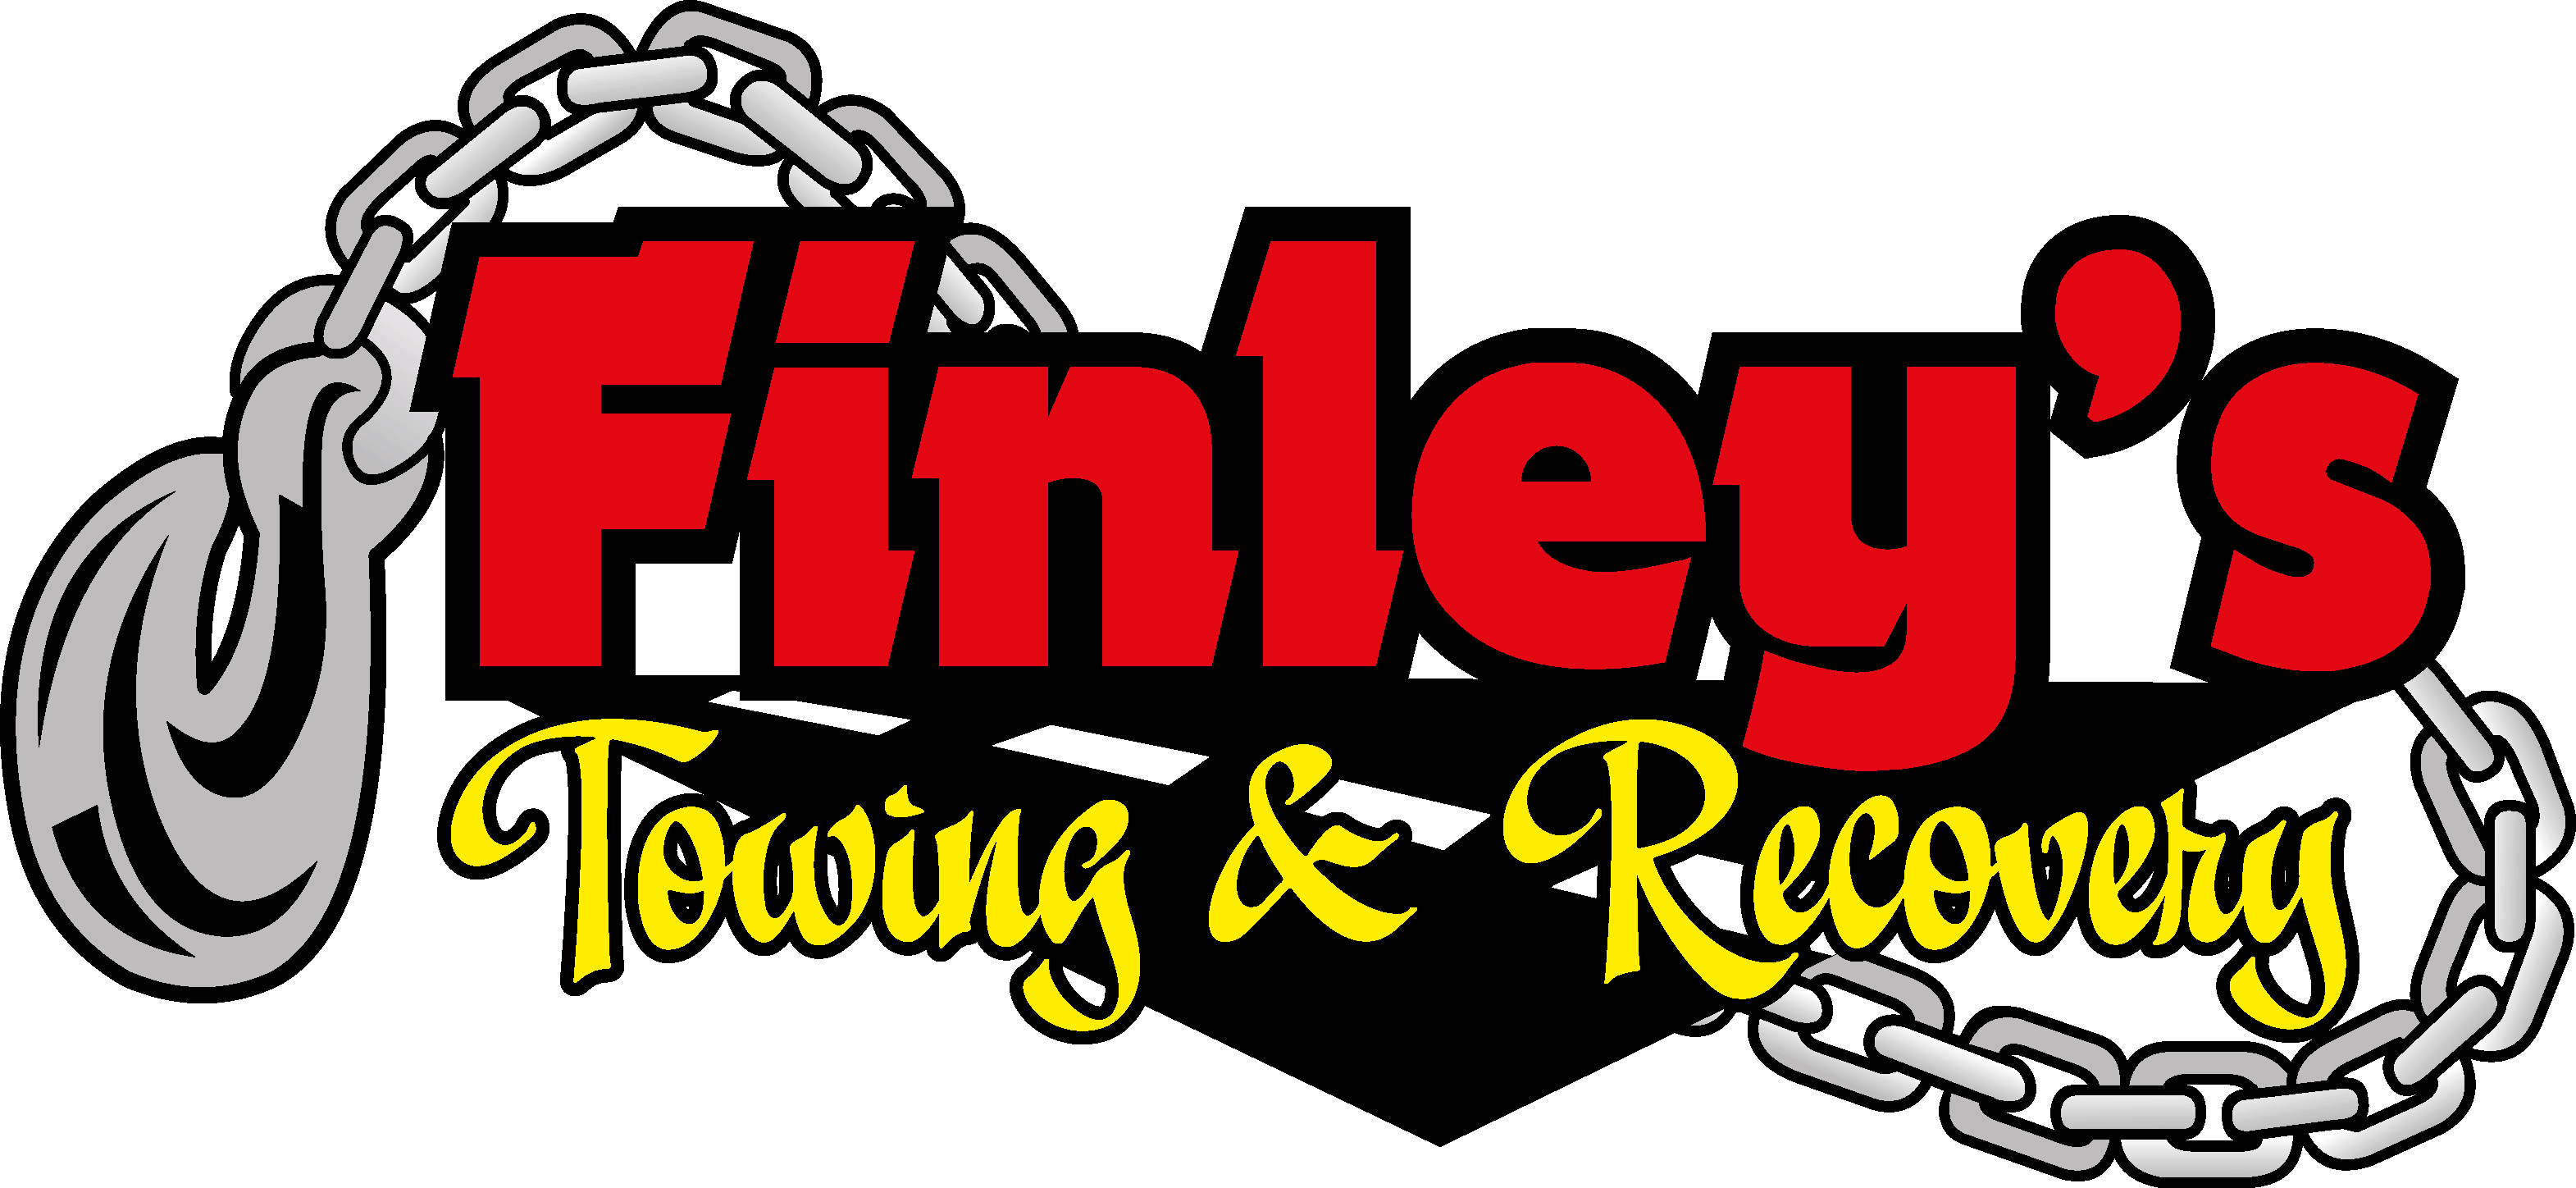 Finley's Towing and Recovery